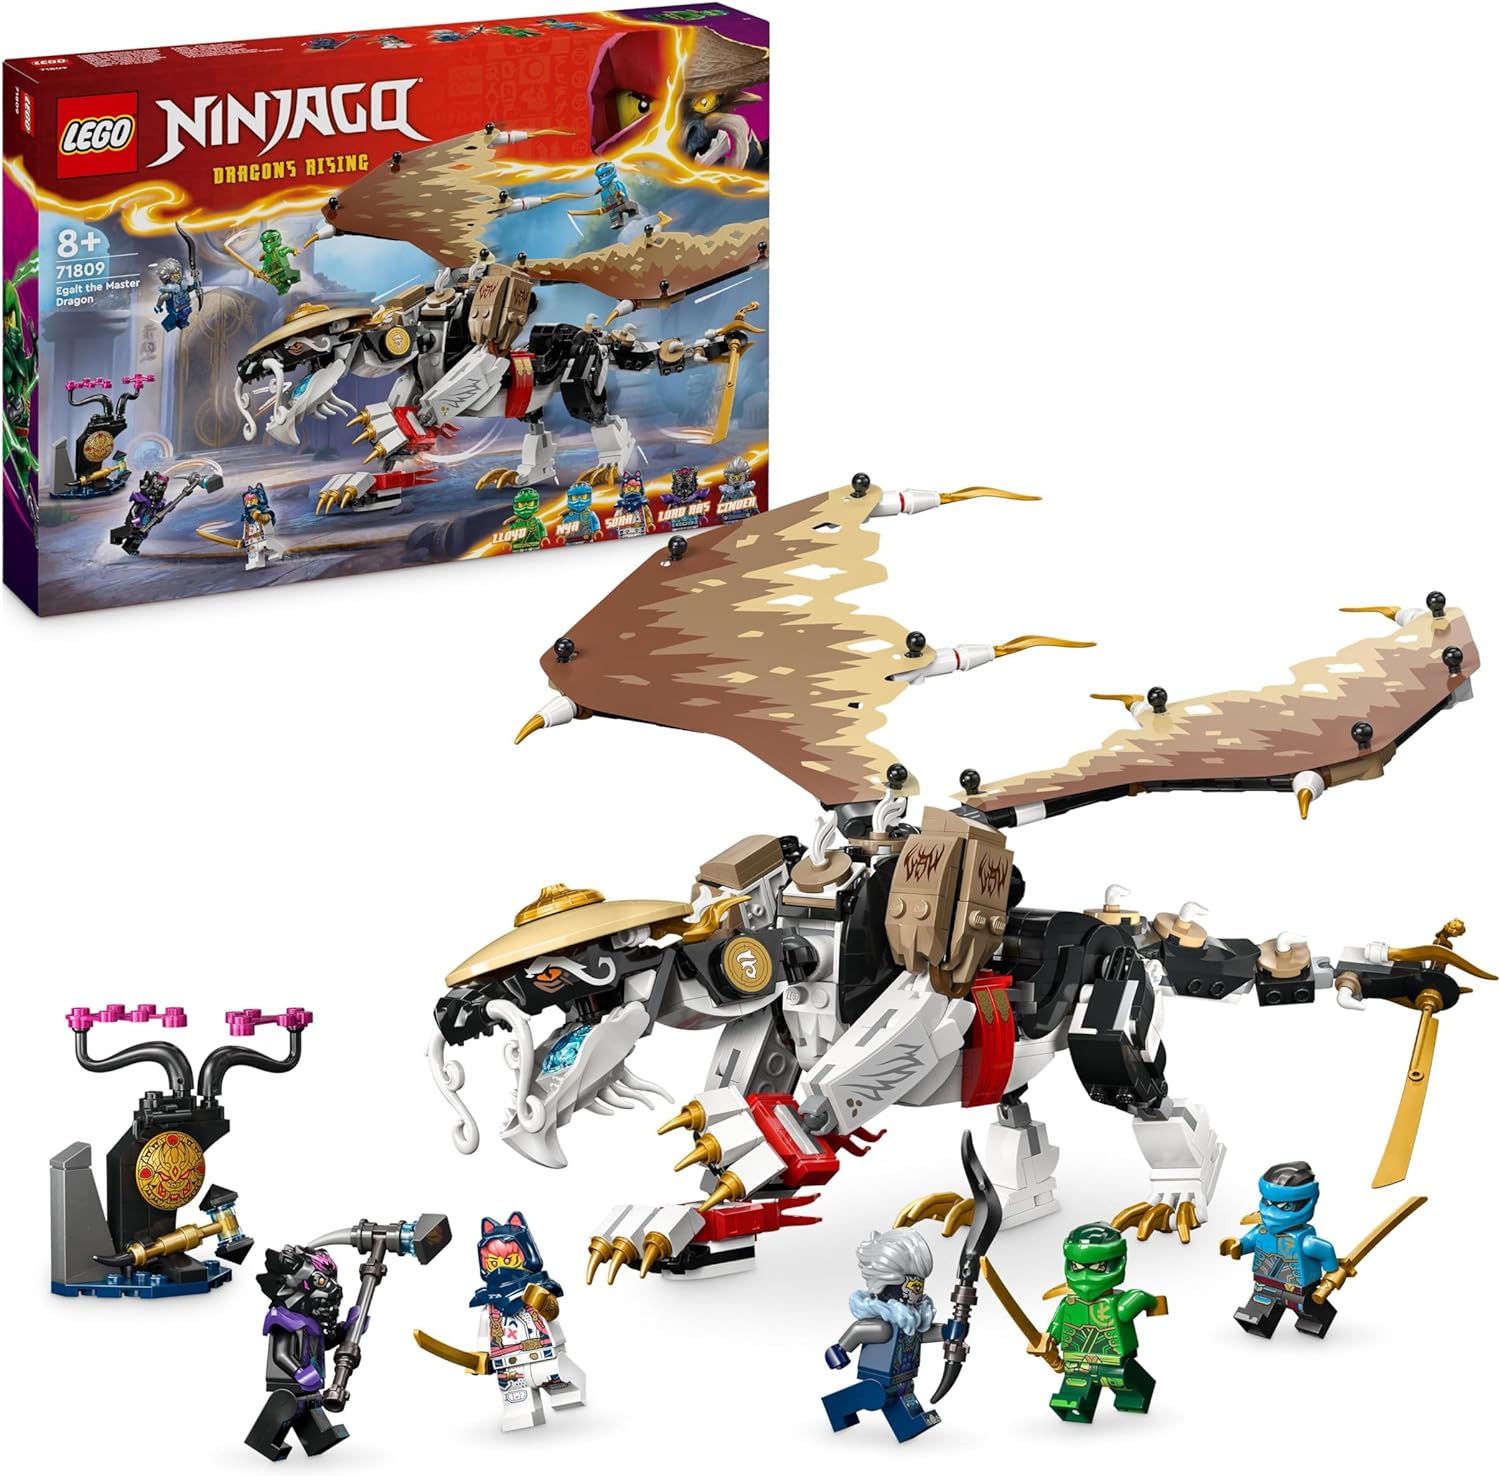 LEGO Ninjago Egalt the Master Dragon, Ninja Set with Dragon Toy and 5 Figures Including Lloyd and NYA, Dragon Master, Gift for Boys and Girls from 8 Years 71809